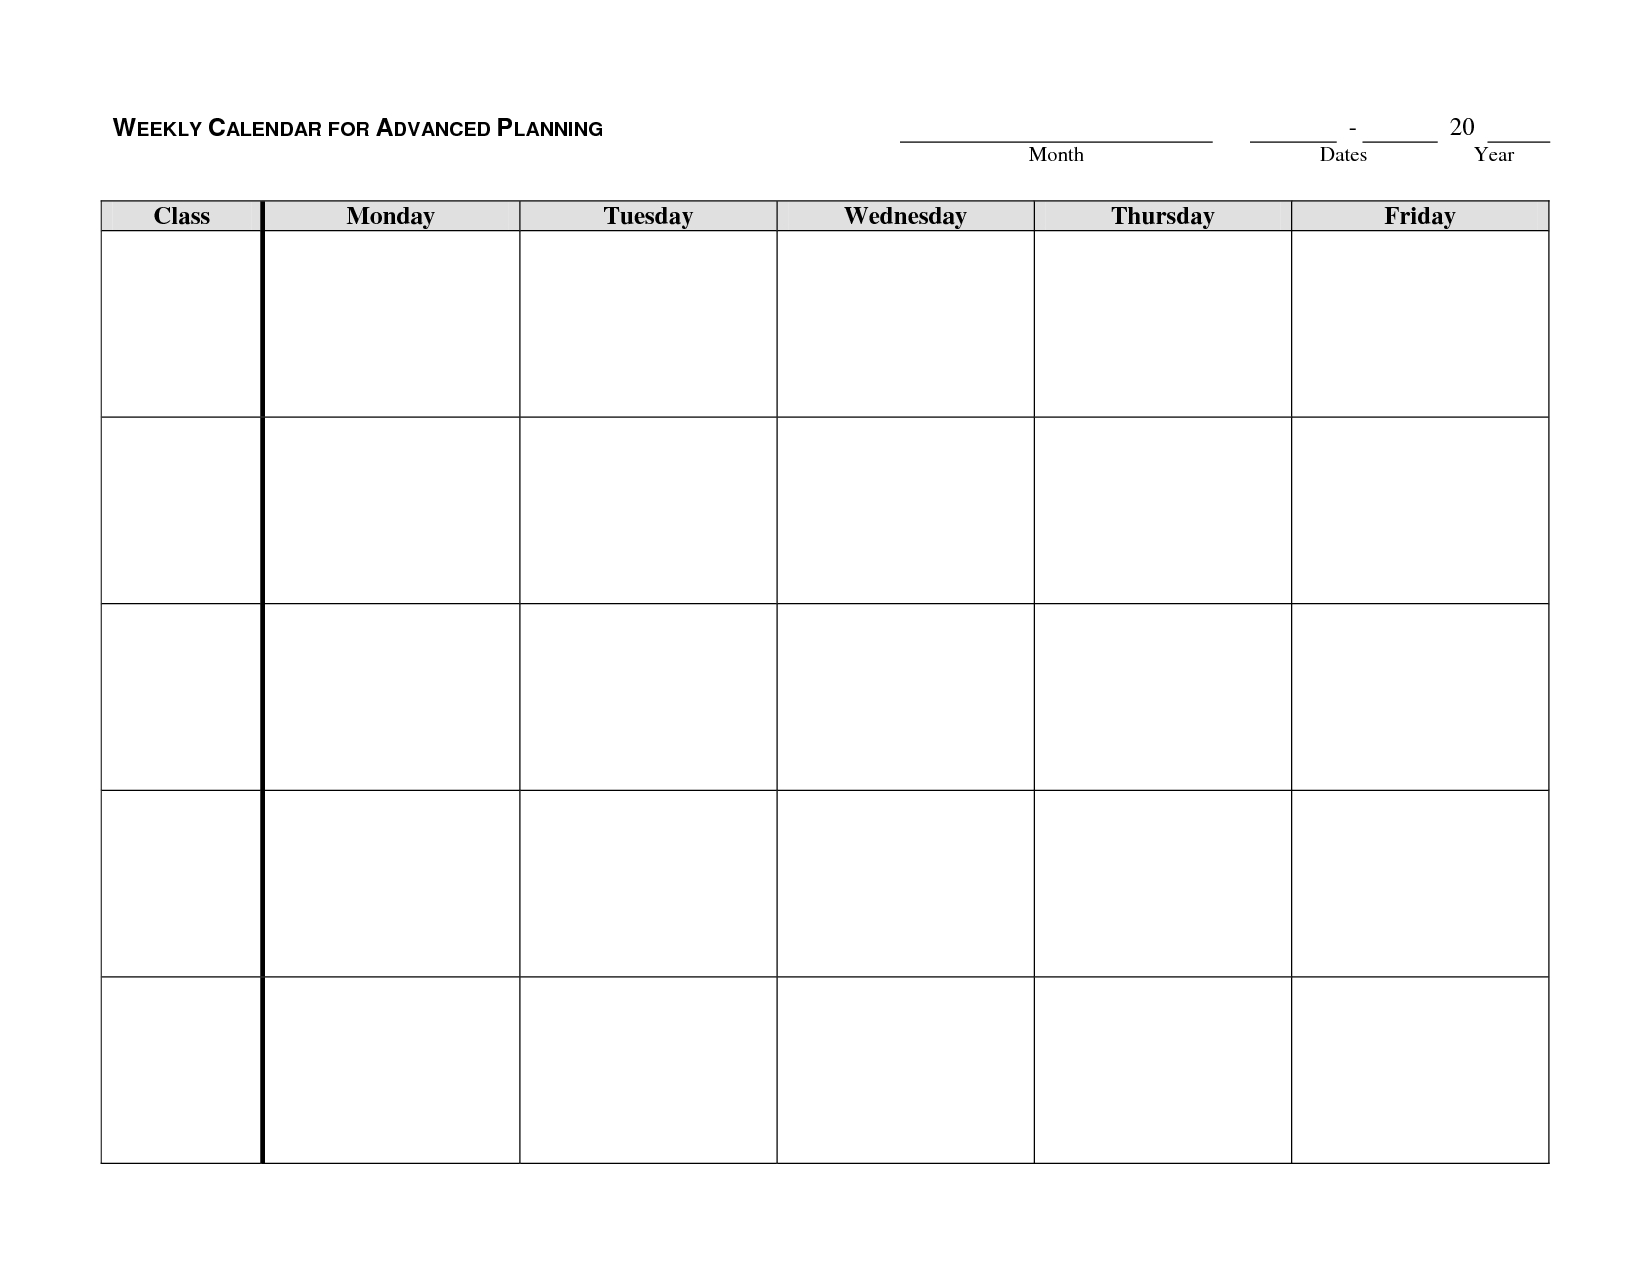 Weekly Calendar Template - Google Search | Autism/school-Monday Friday Monthly Calendar Template